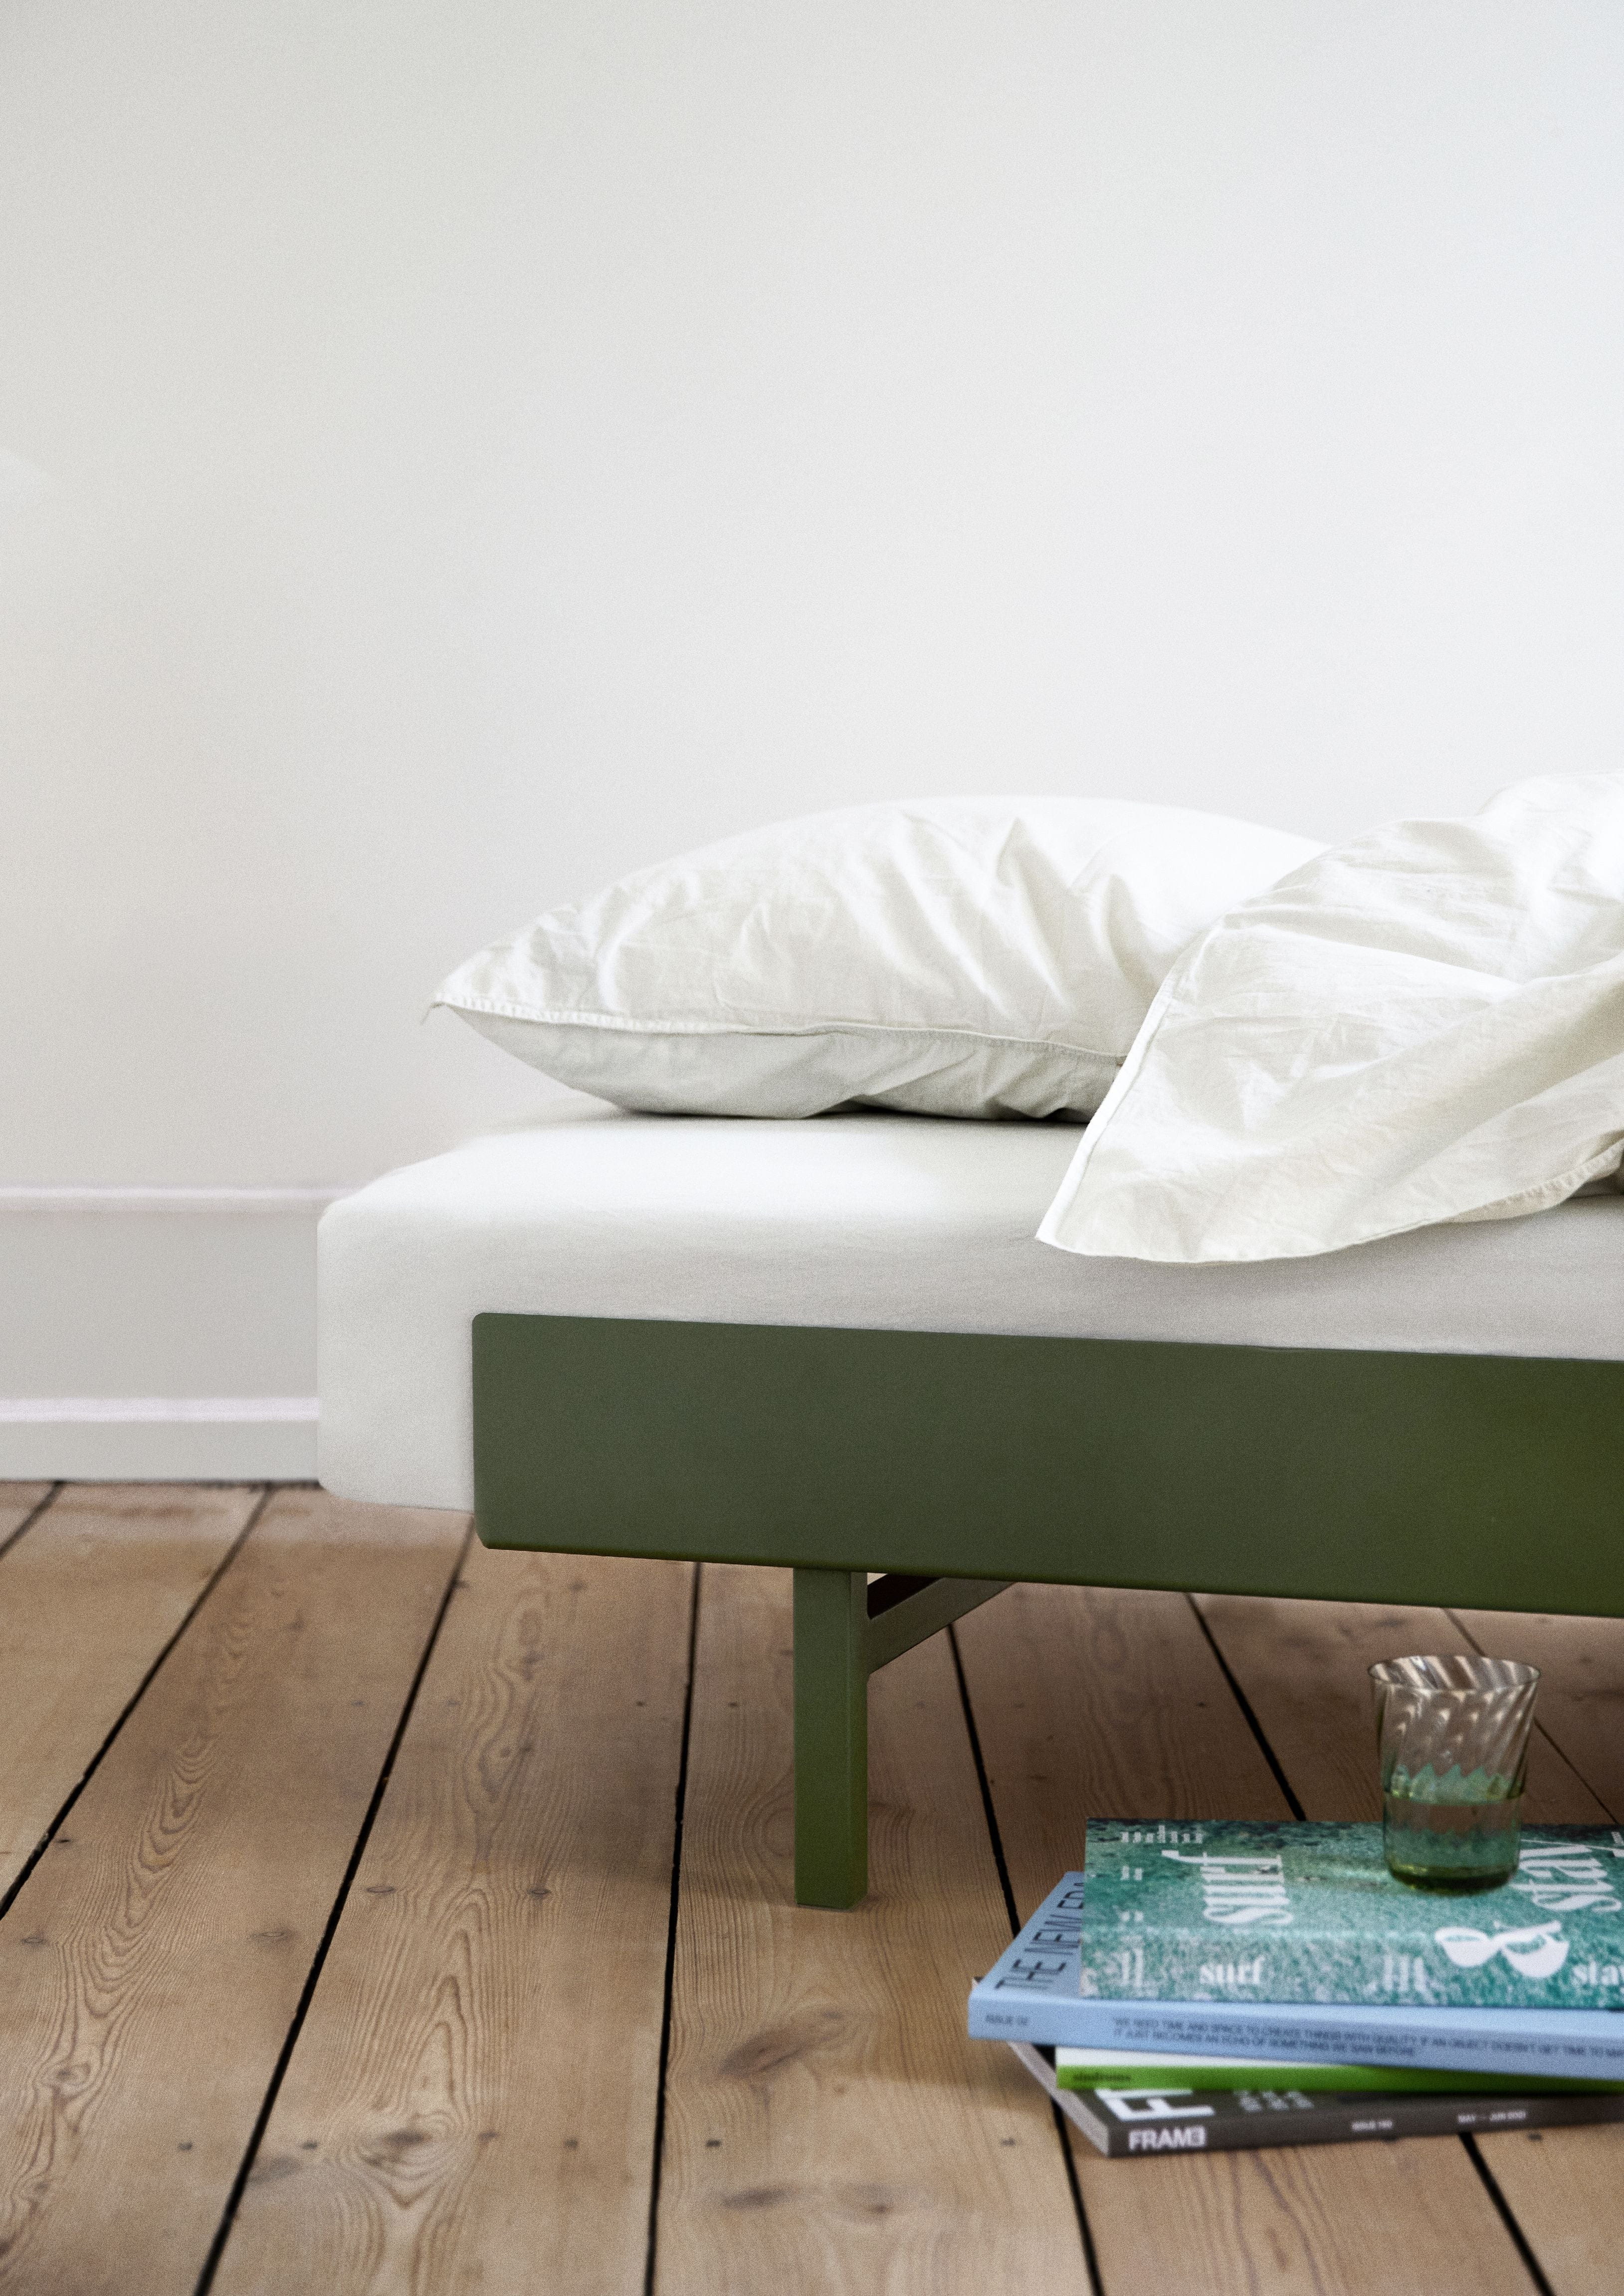 Moebe Bed With 2 Bedside Tables 90 Cm, Pine Green